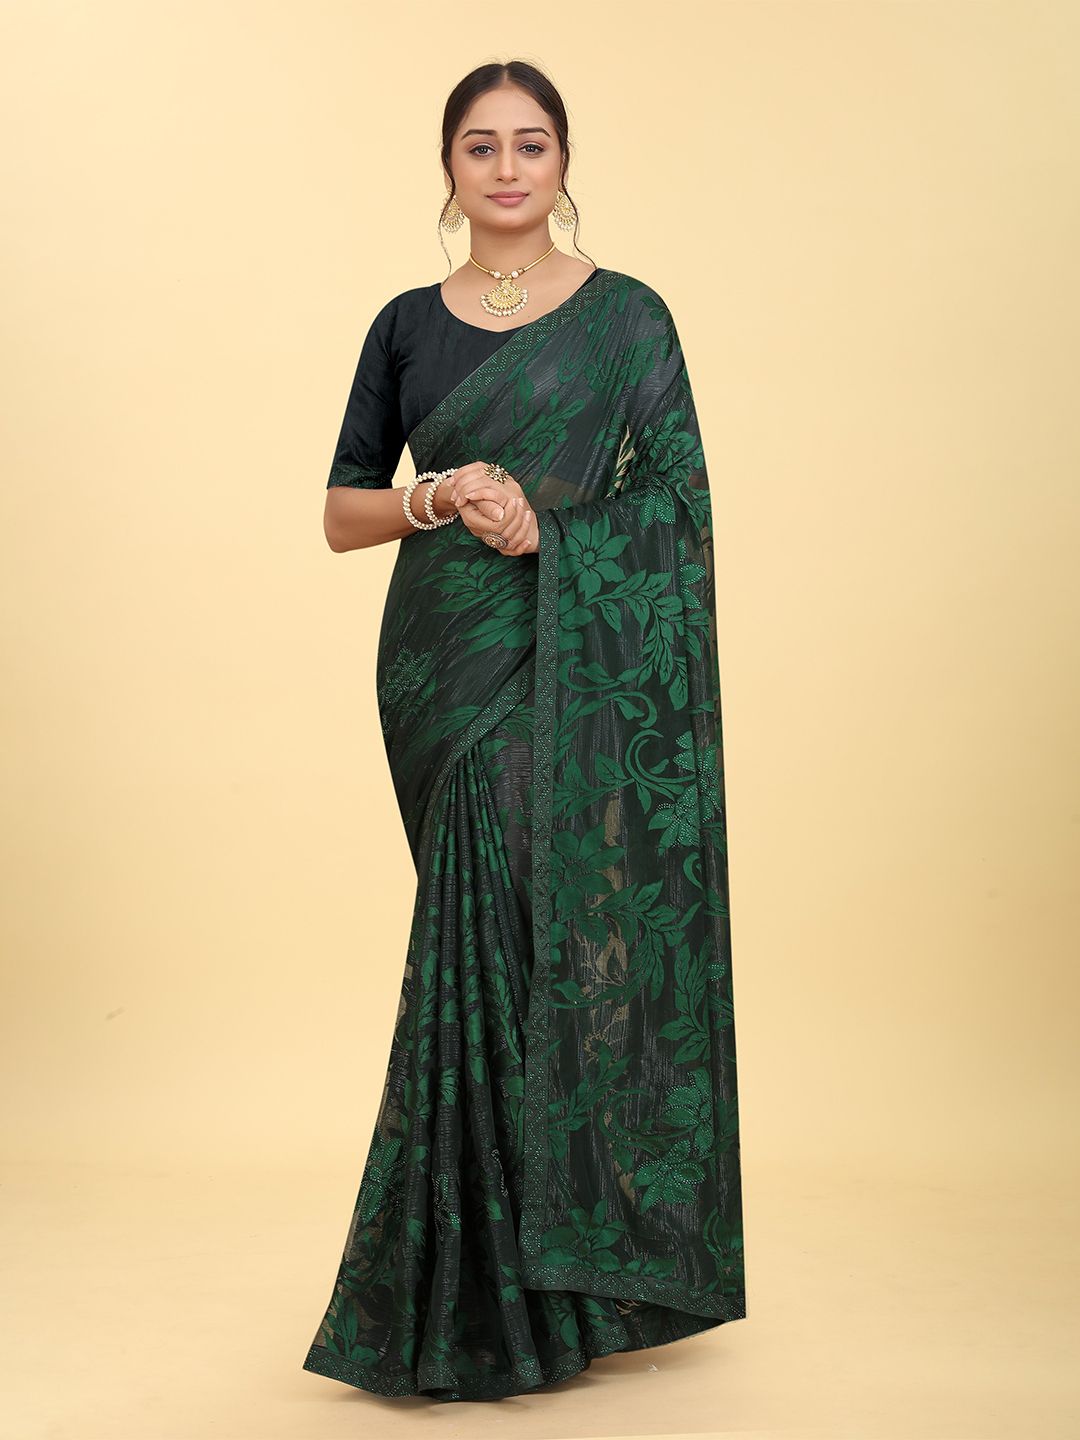 BAESD Floral Embellished Satin Saree Price in India